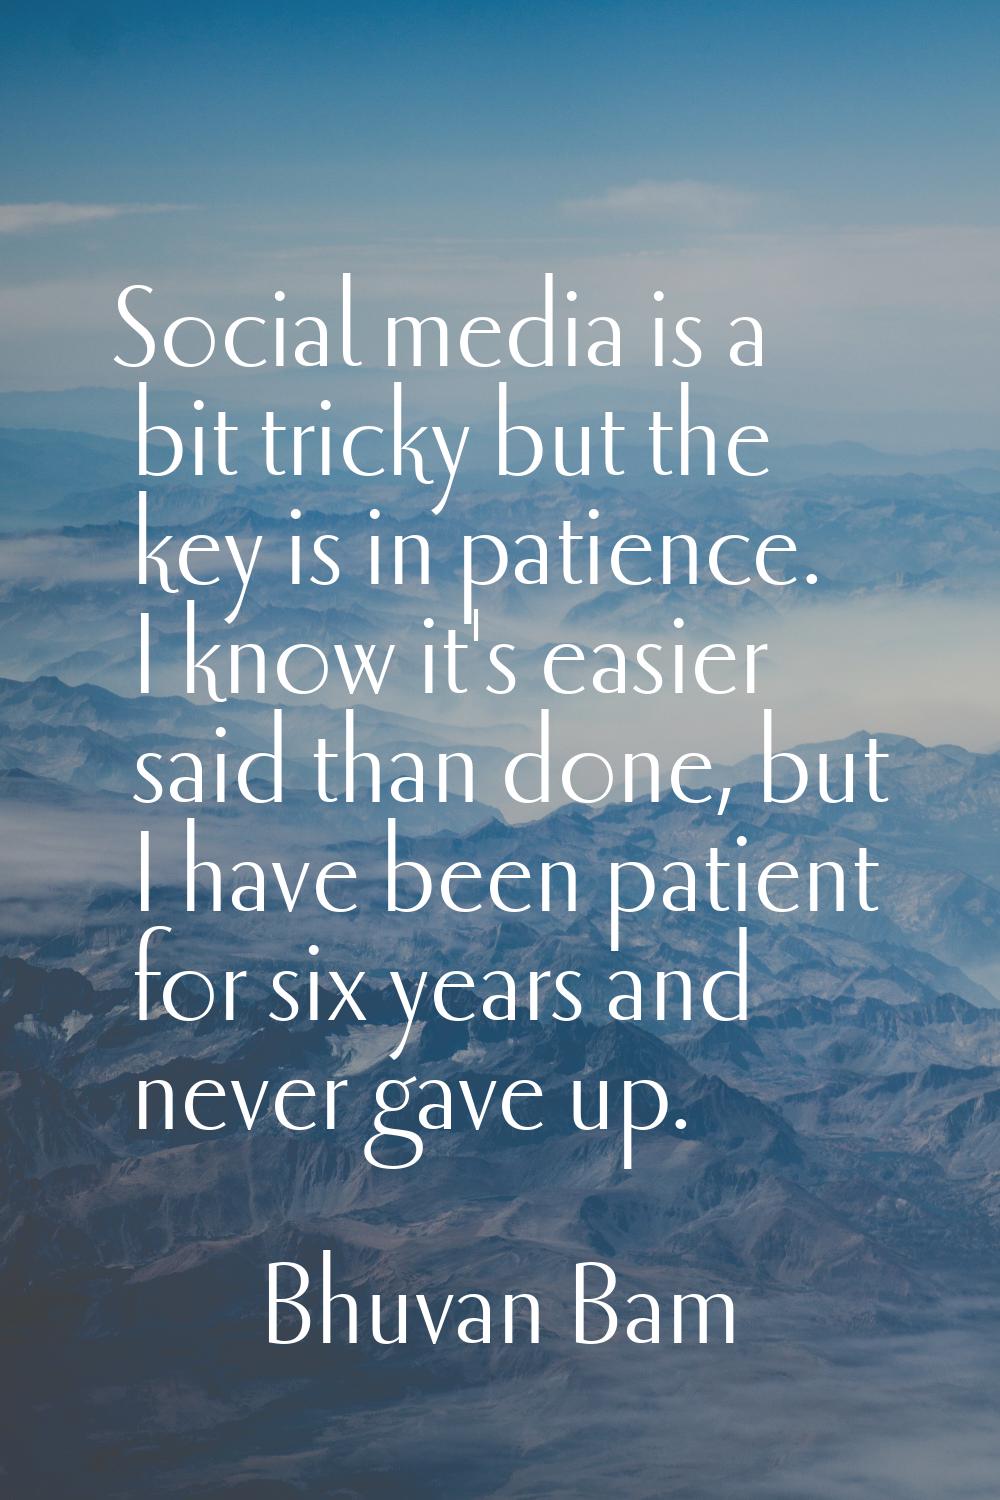 Social media is a bit tricky but the key is in patience. I know it's easier said than done, but I h